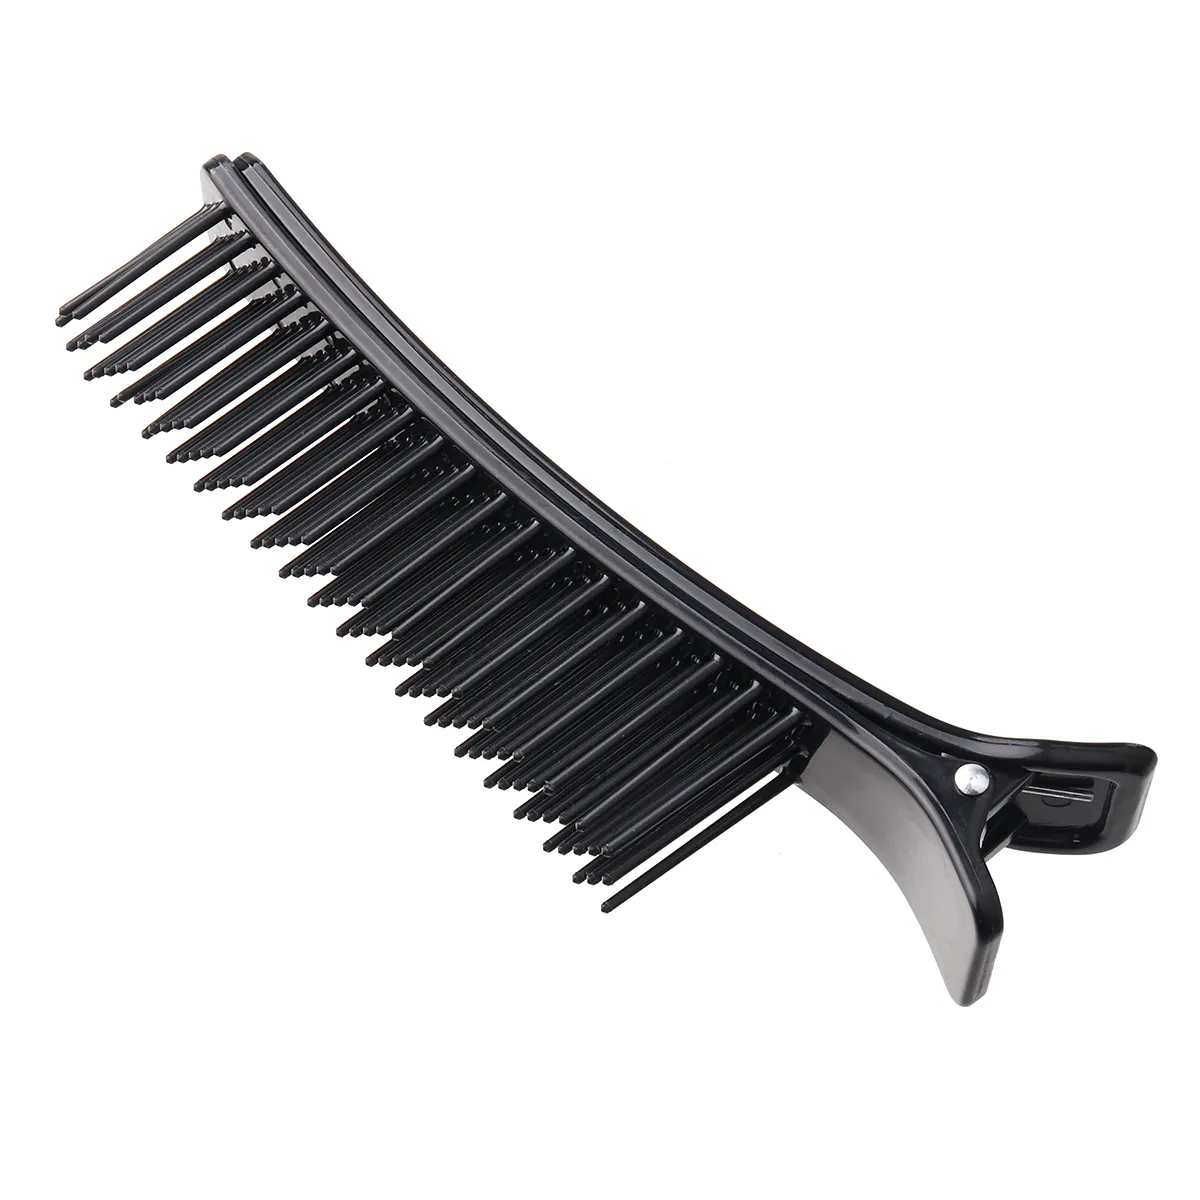 Professional Hair Clip Clamps Hairdressing Sectioning Cutting Comb Salon Drying Perm Dyeing Hairstyling Tool